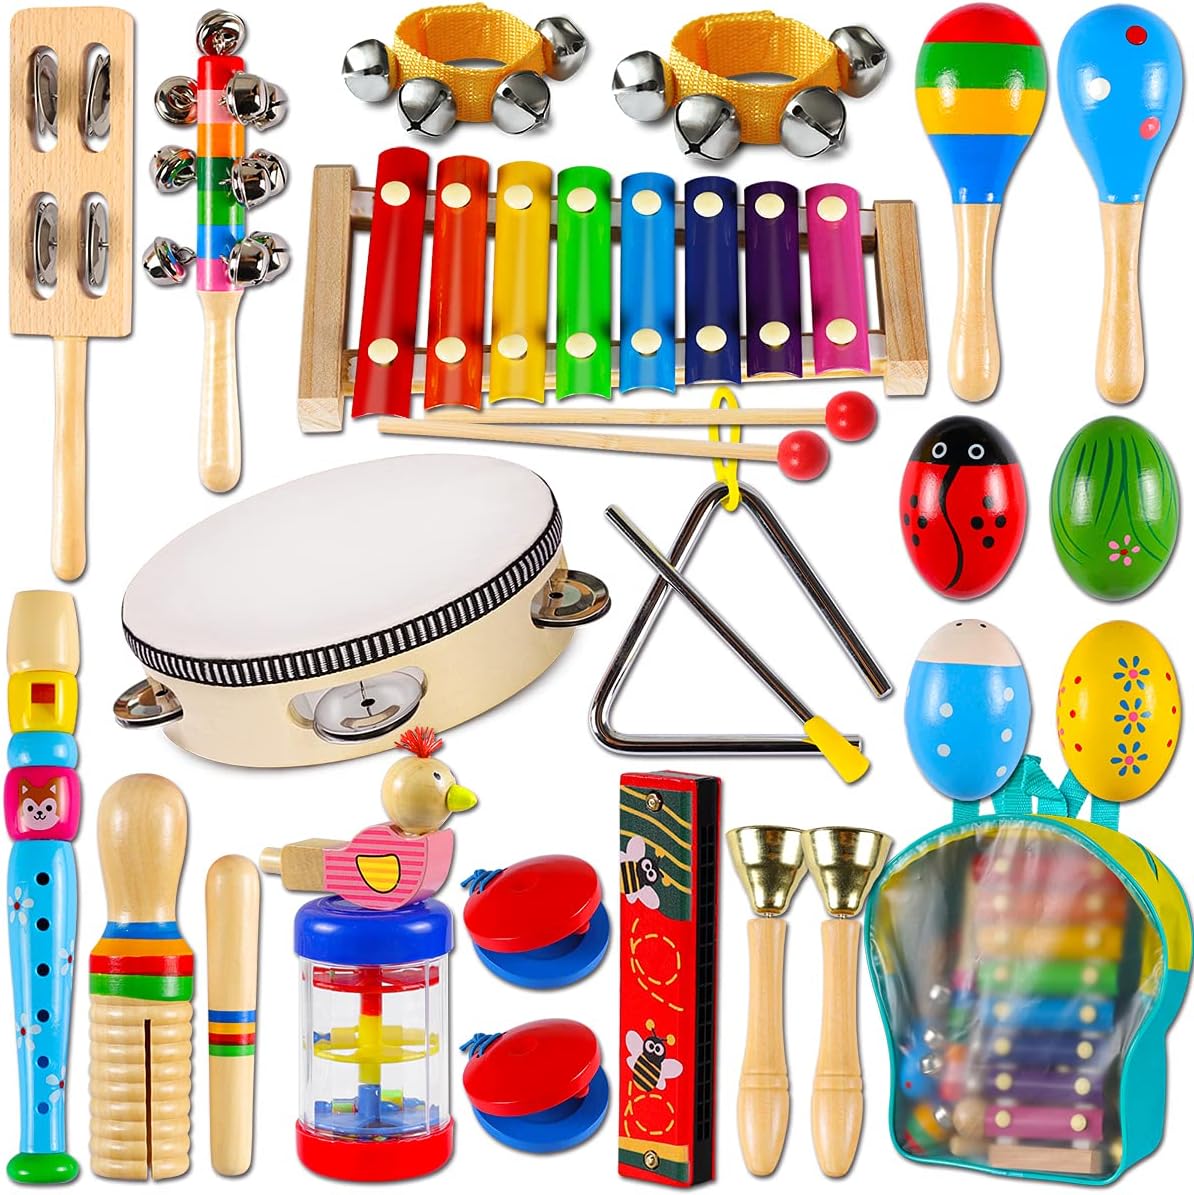 Wooden Percussion Instruments Toy Review